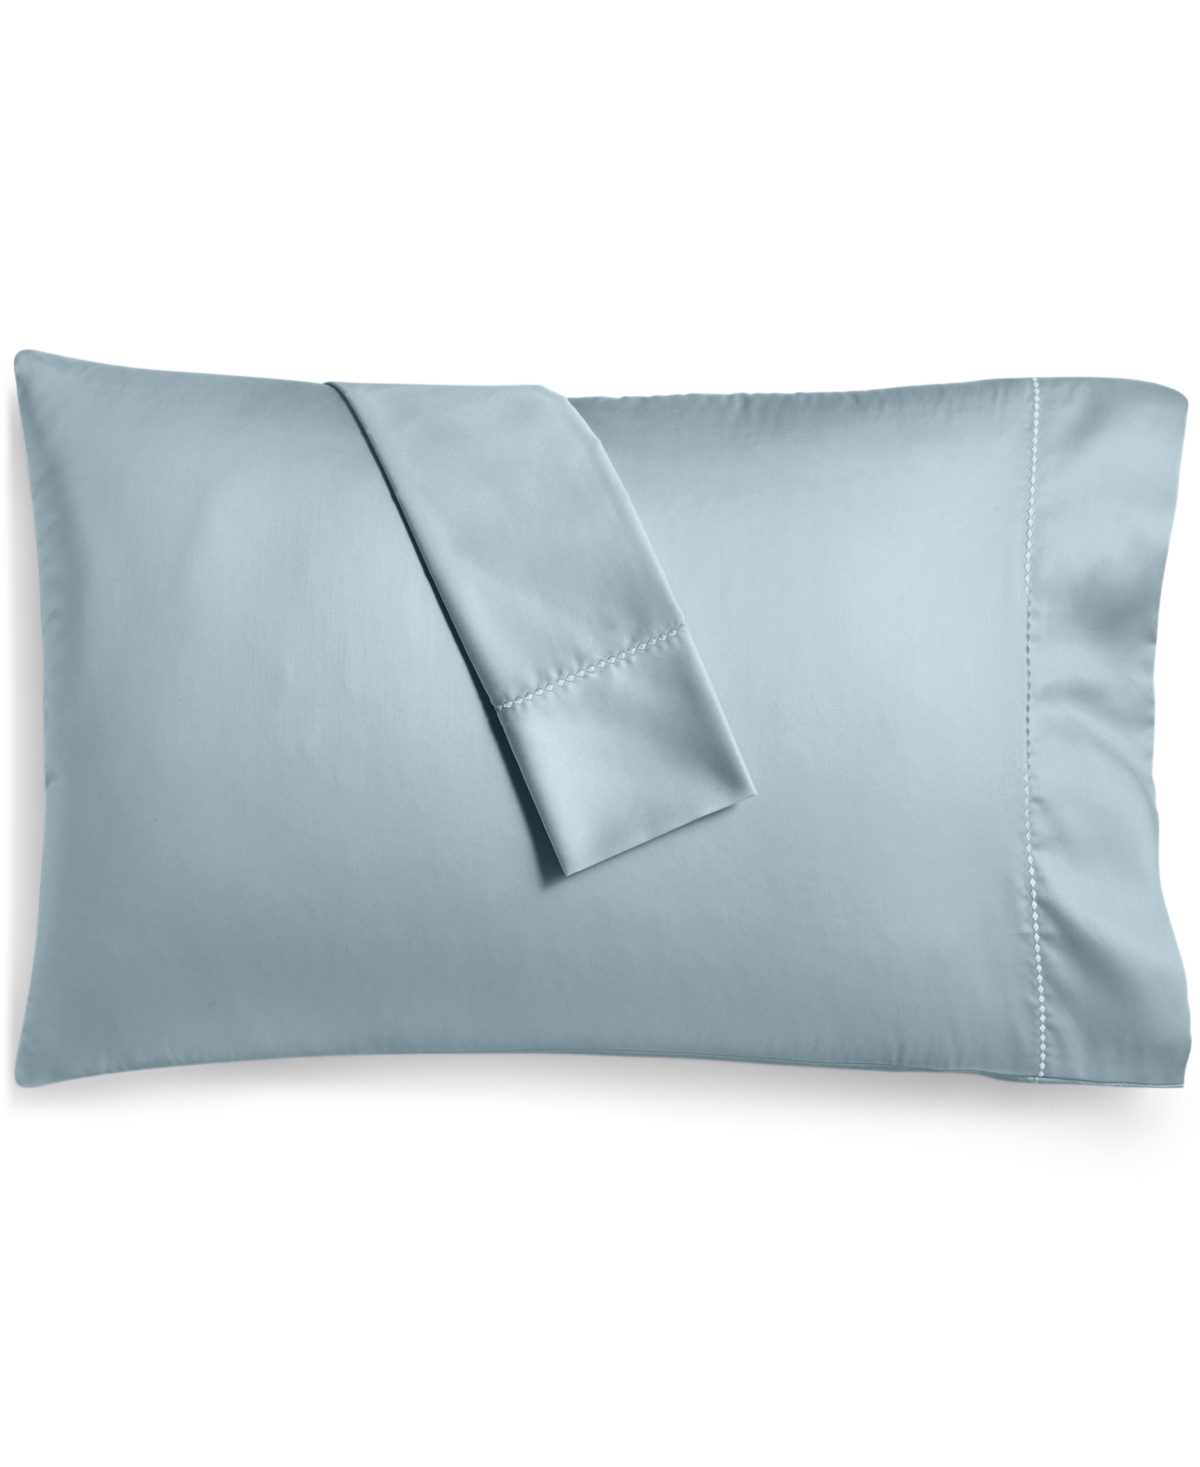 Martha Stewart Collection Closeout!  Open Stock Solid 400 Thread Count Cotton Sateen Pillowcase, King In Pool (blue)